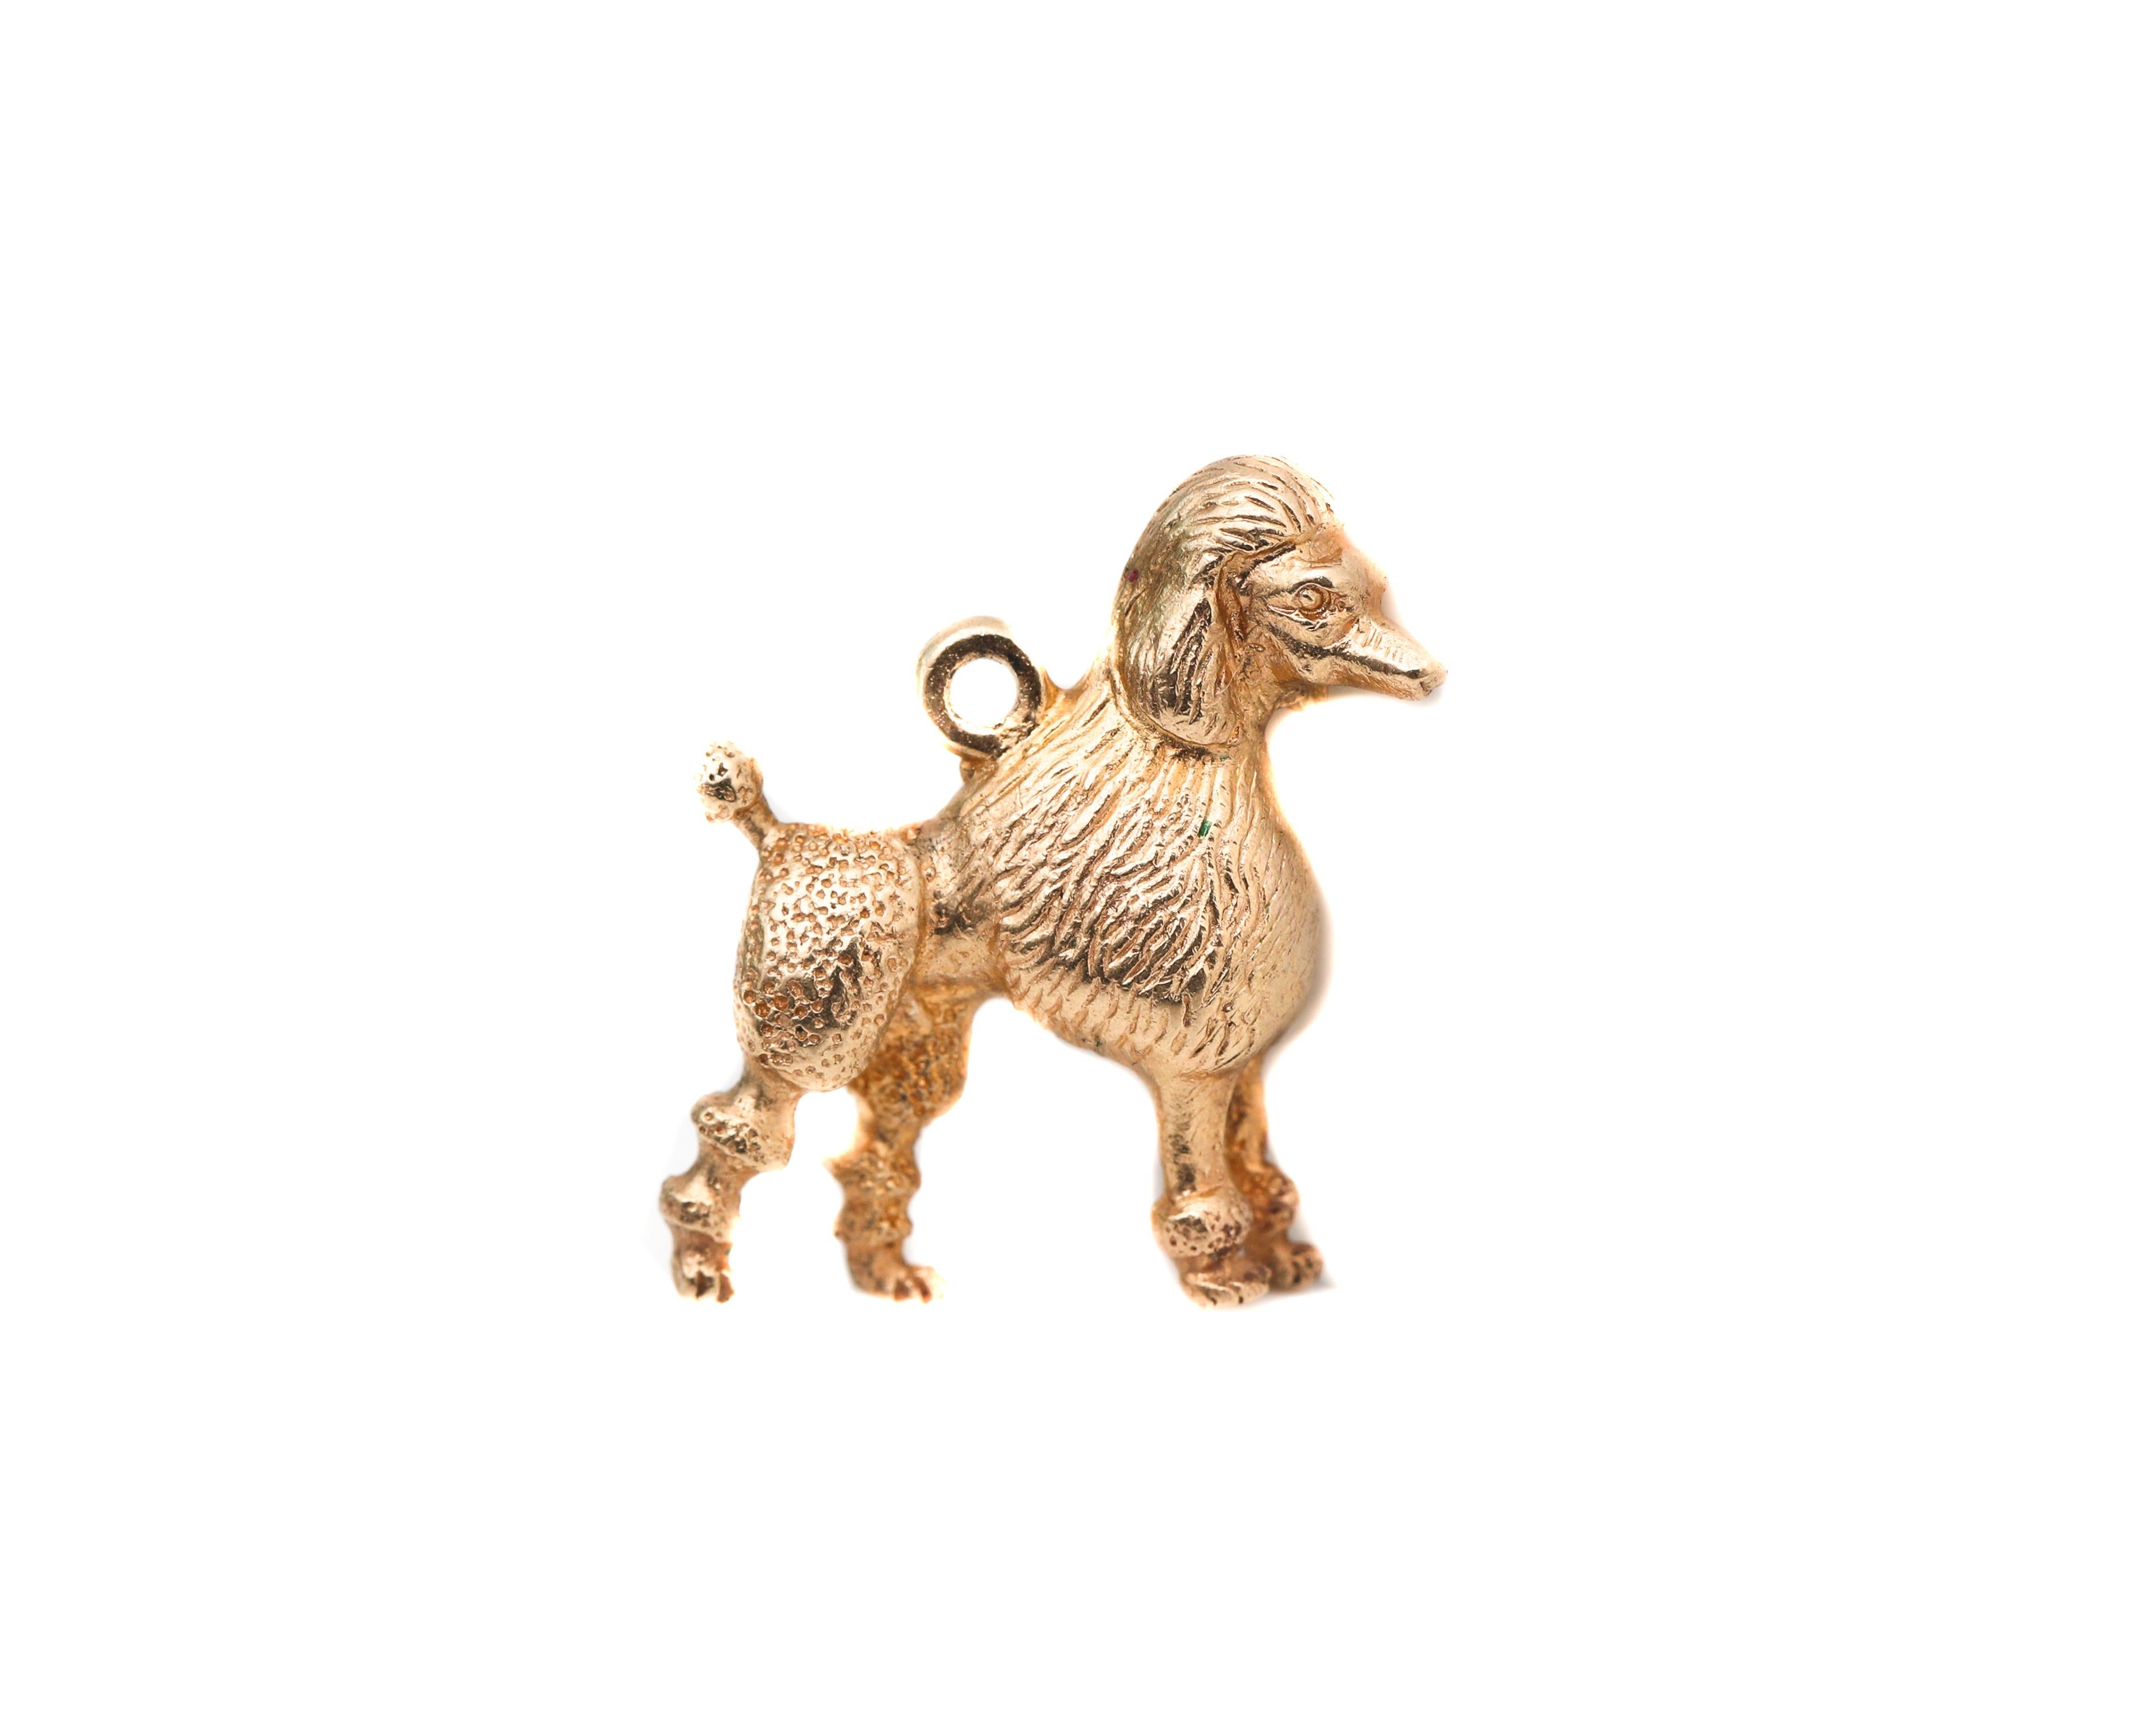 Adorable standing Poodle Charm
Crafted in 14 karat yellow gold with heavy textured details

Charm Details:
Gold: 14 karat yellow gold
Weight: 4.09 grams
Size: 15 millimeters height x 10 millimeters wide 